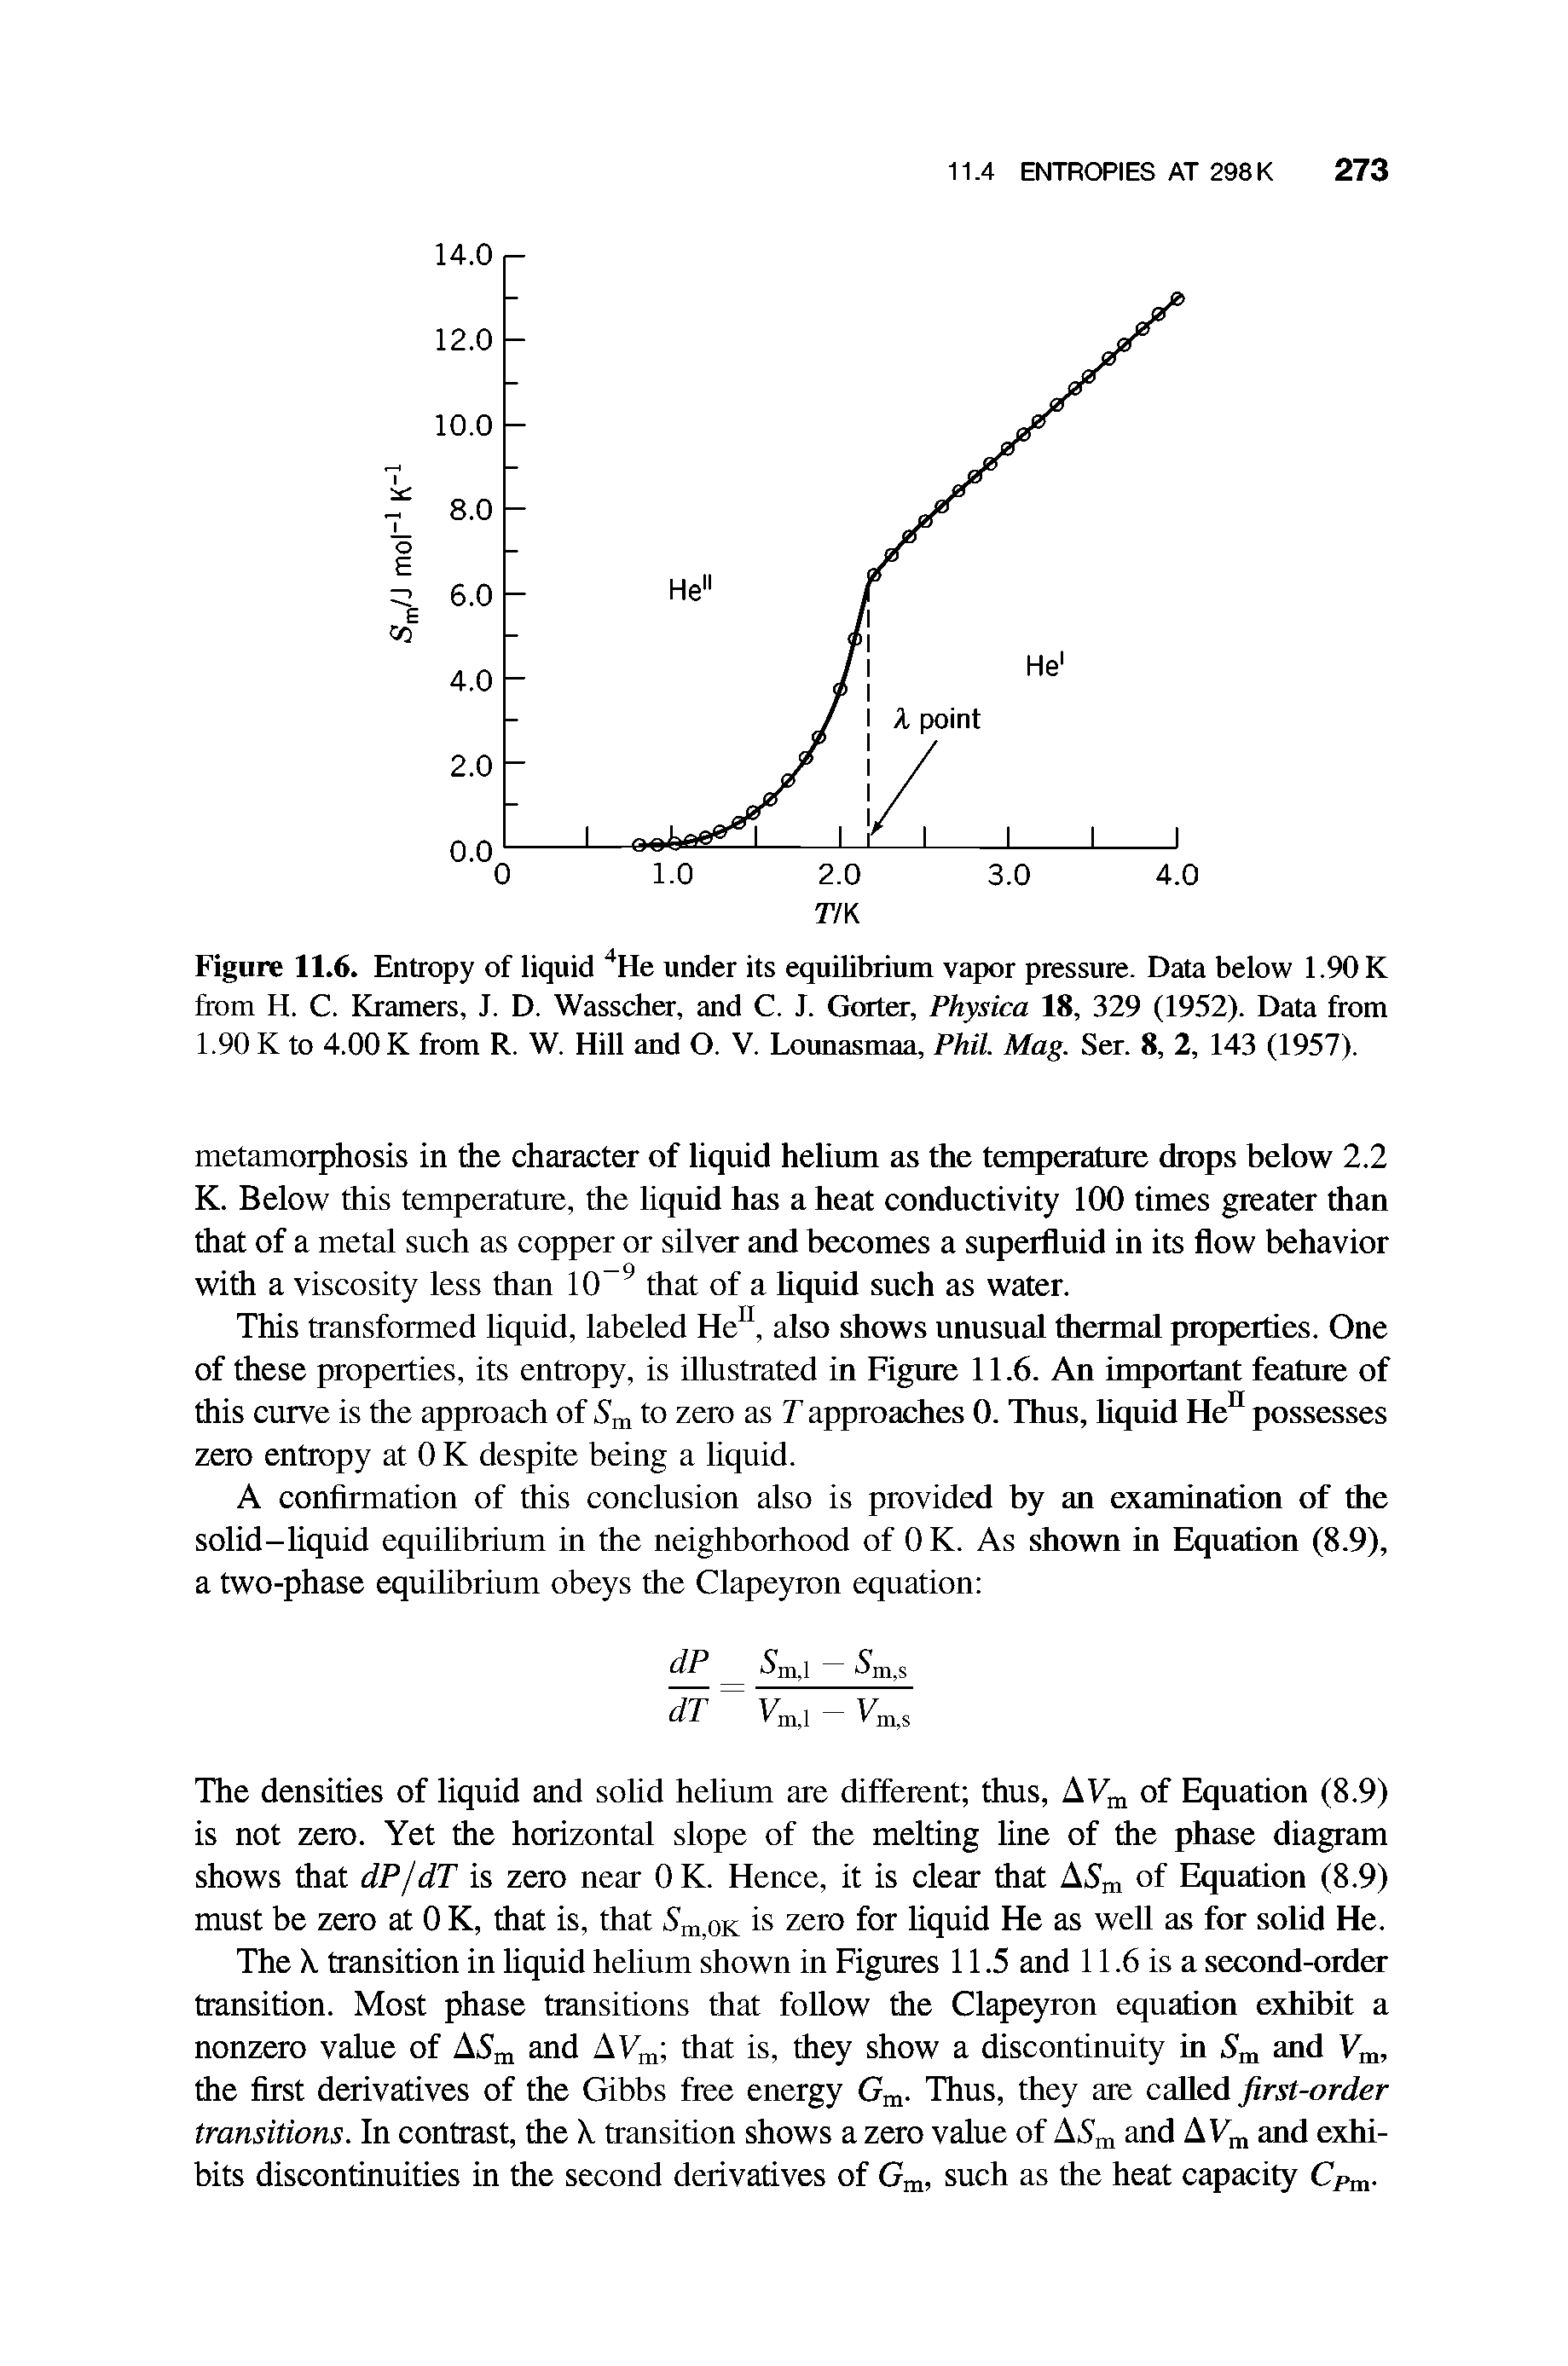 Figure 11.6. Entropy of liquid He under its equilibrium vapor pressure. Data below 1.90 K from H. C. Kramers, J. D. Wasscber, and C. J. Gorter, Physica 18, 329 (1952). Data from 1.90 K to 4.00 K from R. W. Hill and O. V. Lounasmaa, Phil. Mag. Ser. 8, 2, 143 (1957).